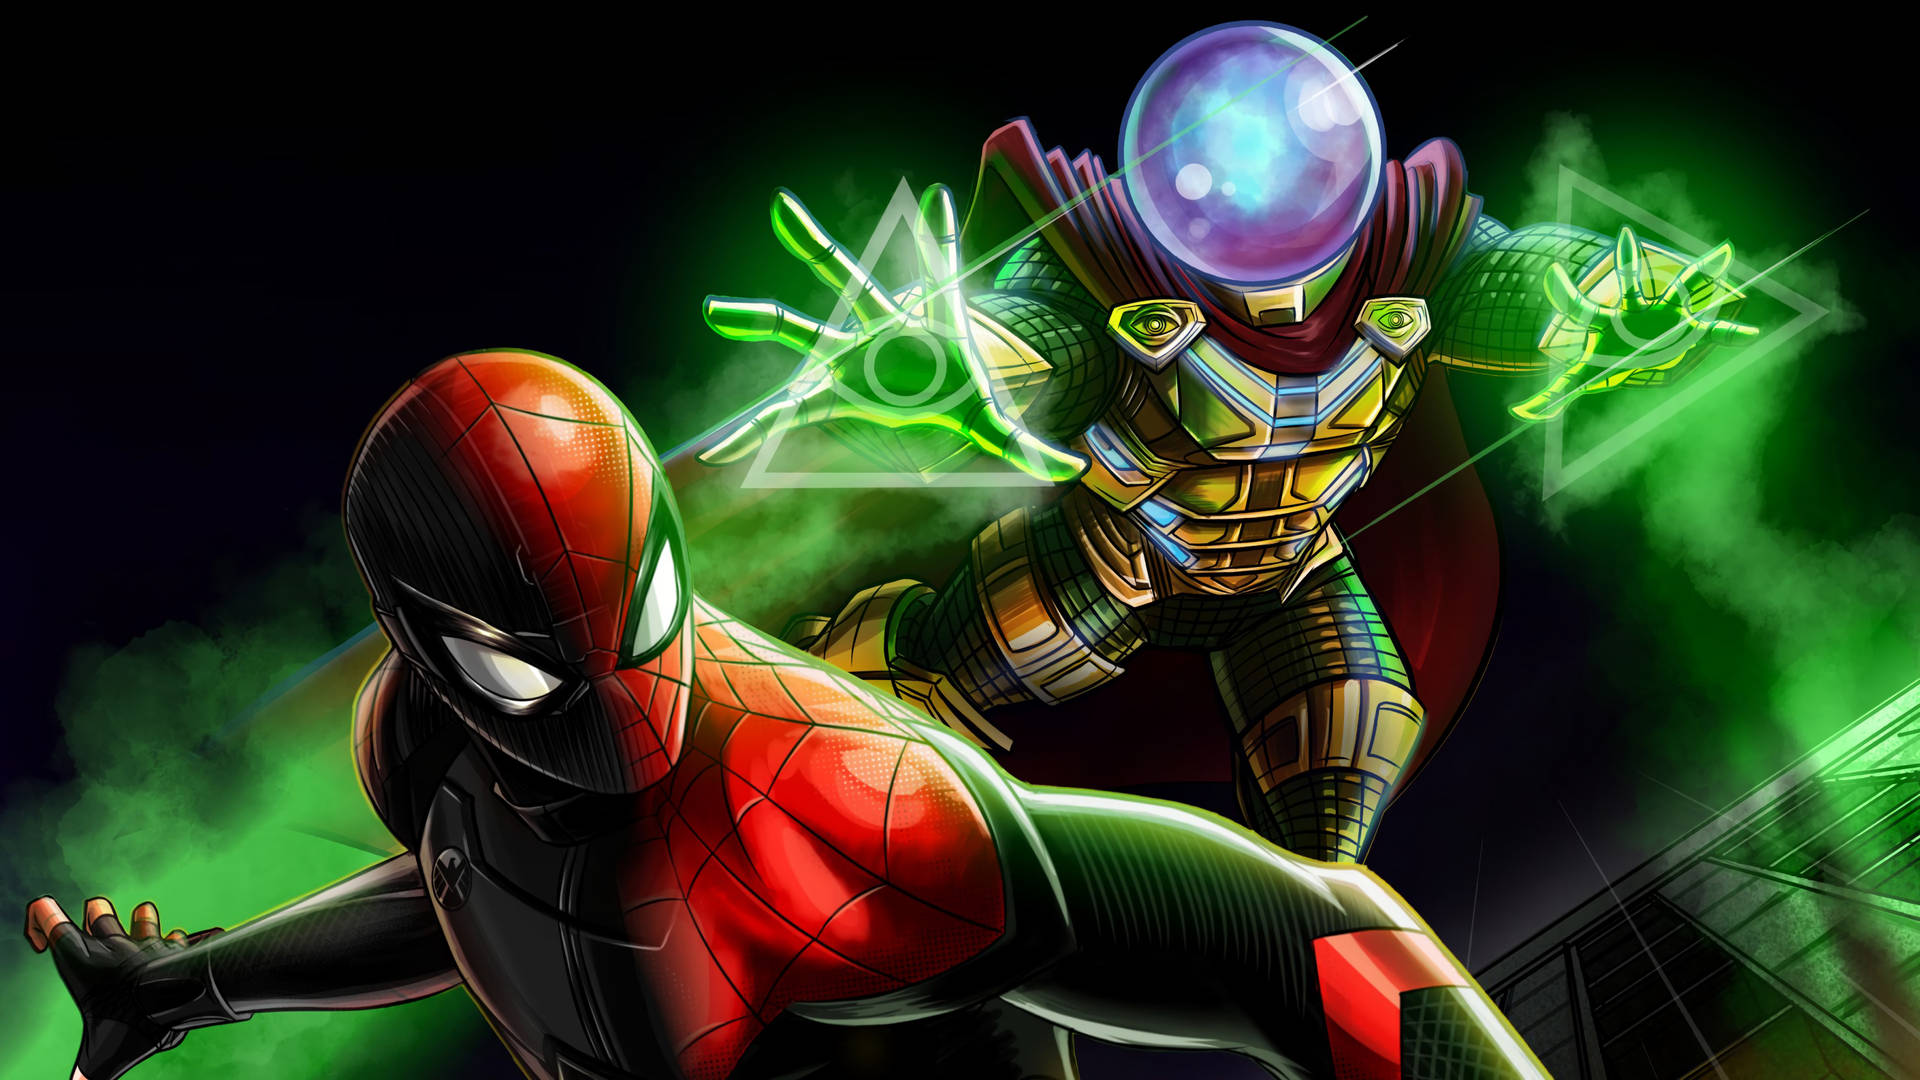 3D Mysterio And Spider-Man Wallpaper